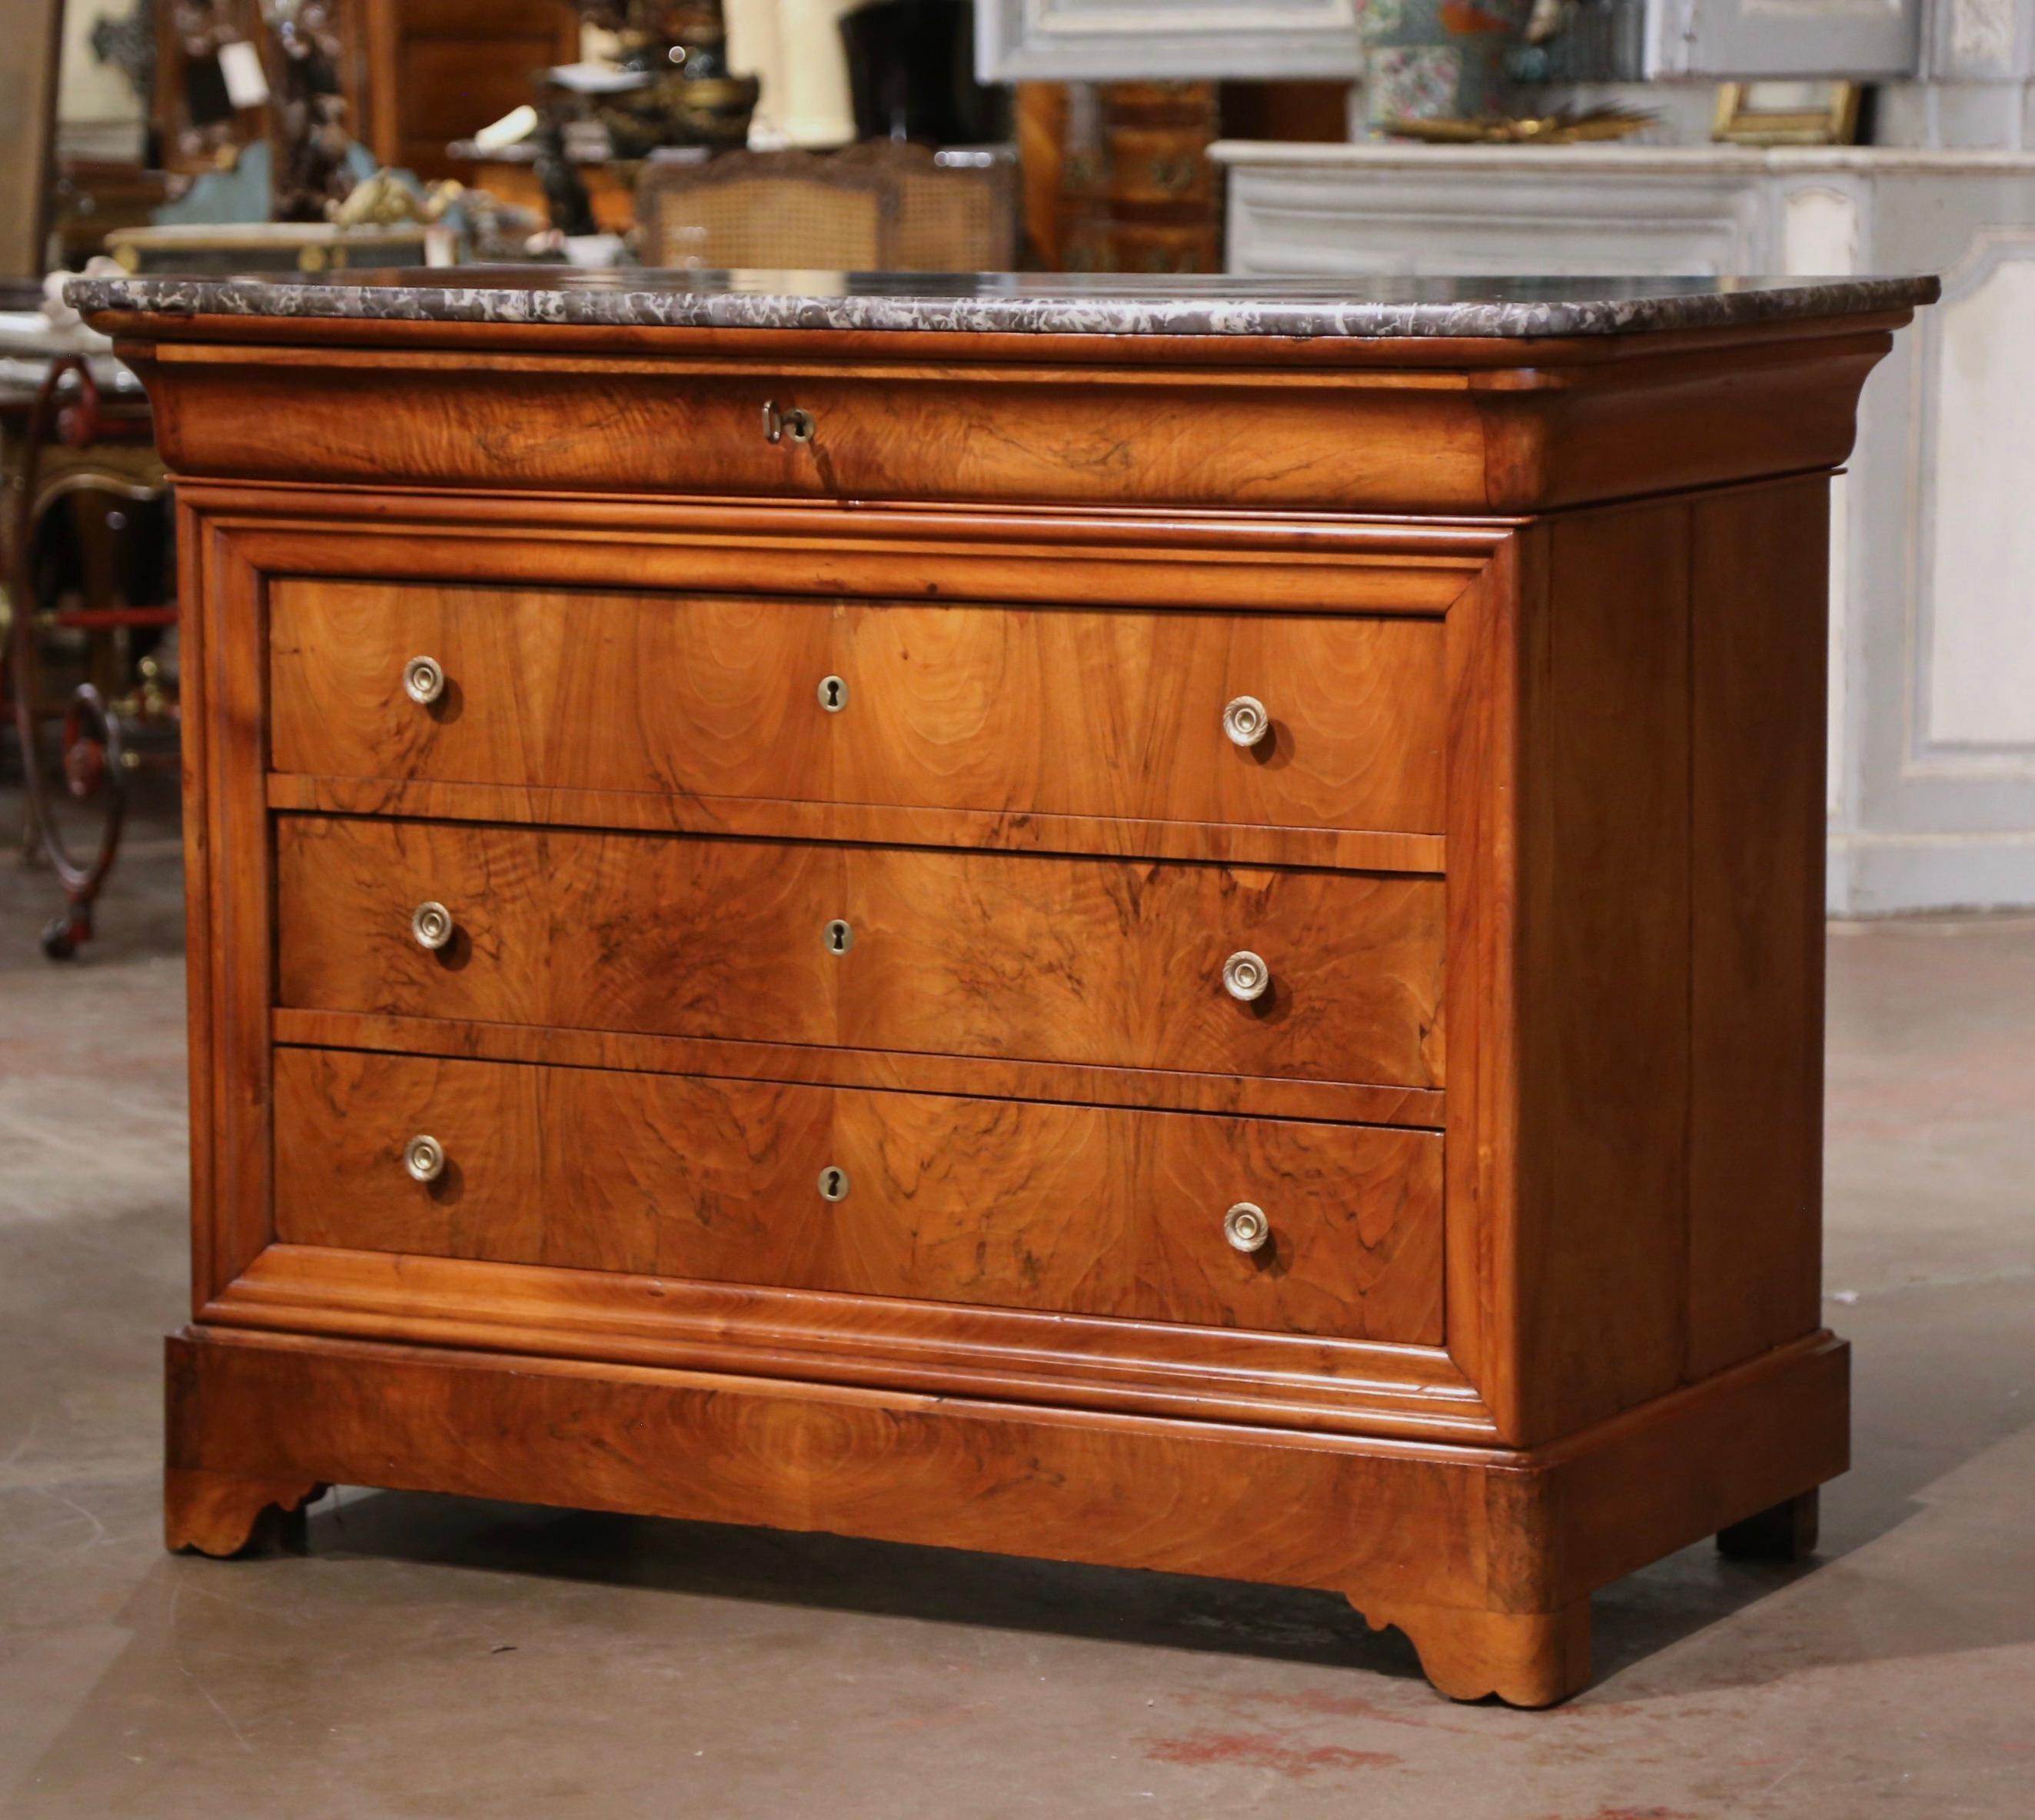 This elegant, antique chest of drawers was crafted in France, circa 1870. Built of walnut, the traditional commode with simple lines stands on front bracket feet over a thick and raised base plinth; the cabinet features four long drawers across the